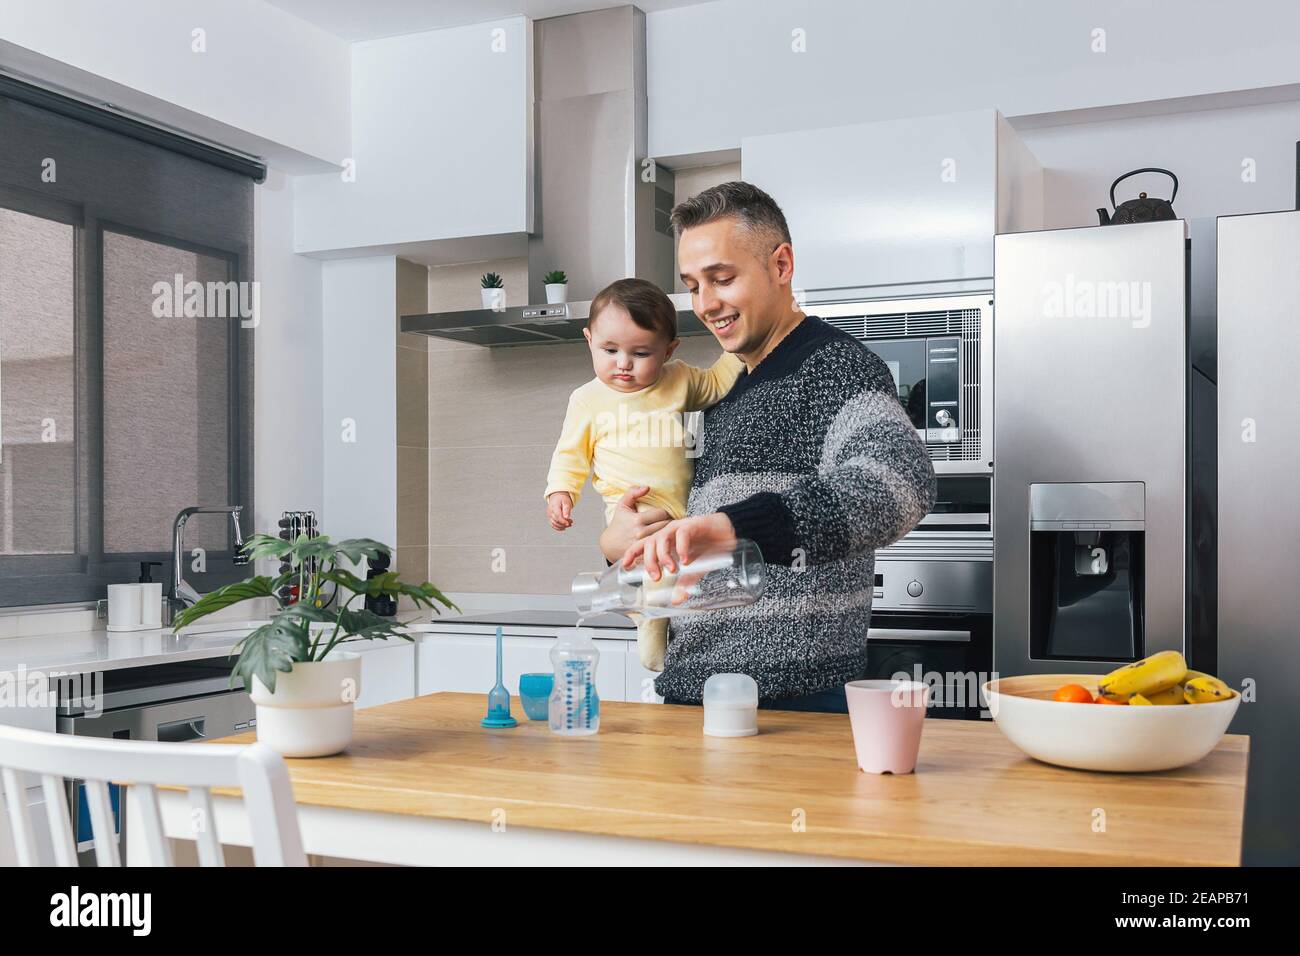 Stock photo of Young single father preparing a feeding bottle while holding his baby in arms in the kitchen. Man and child, parenting fatherhood real Stock Photo